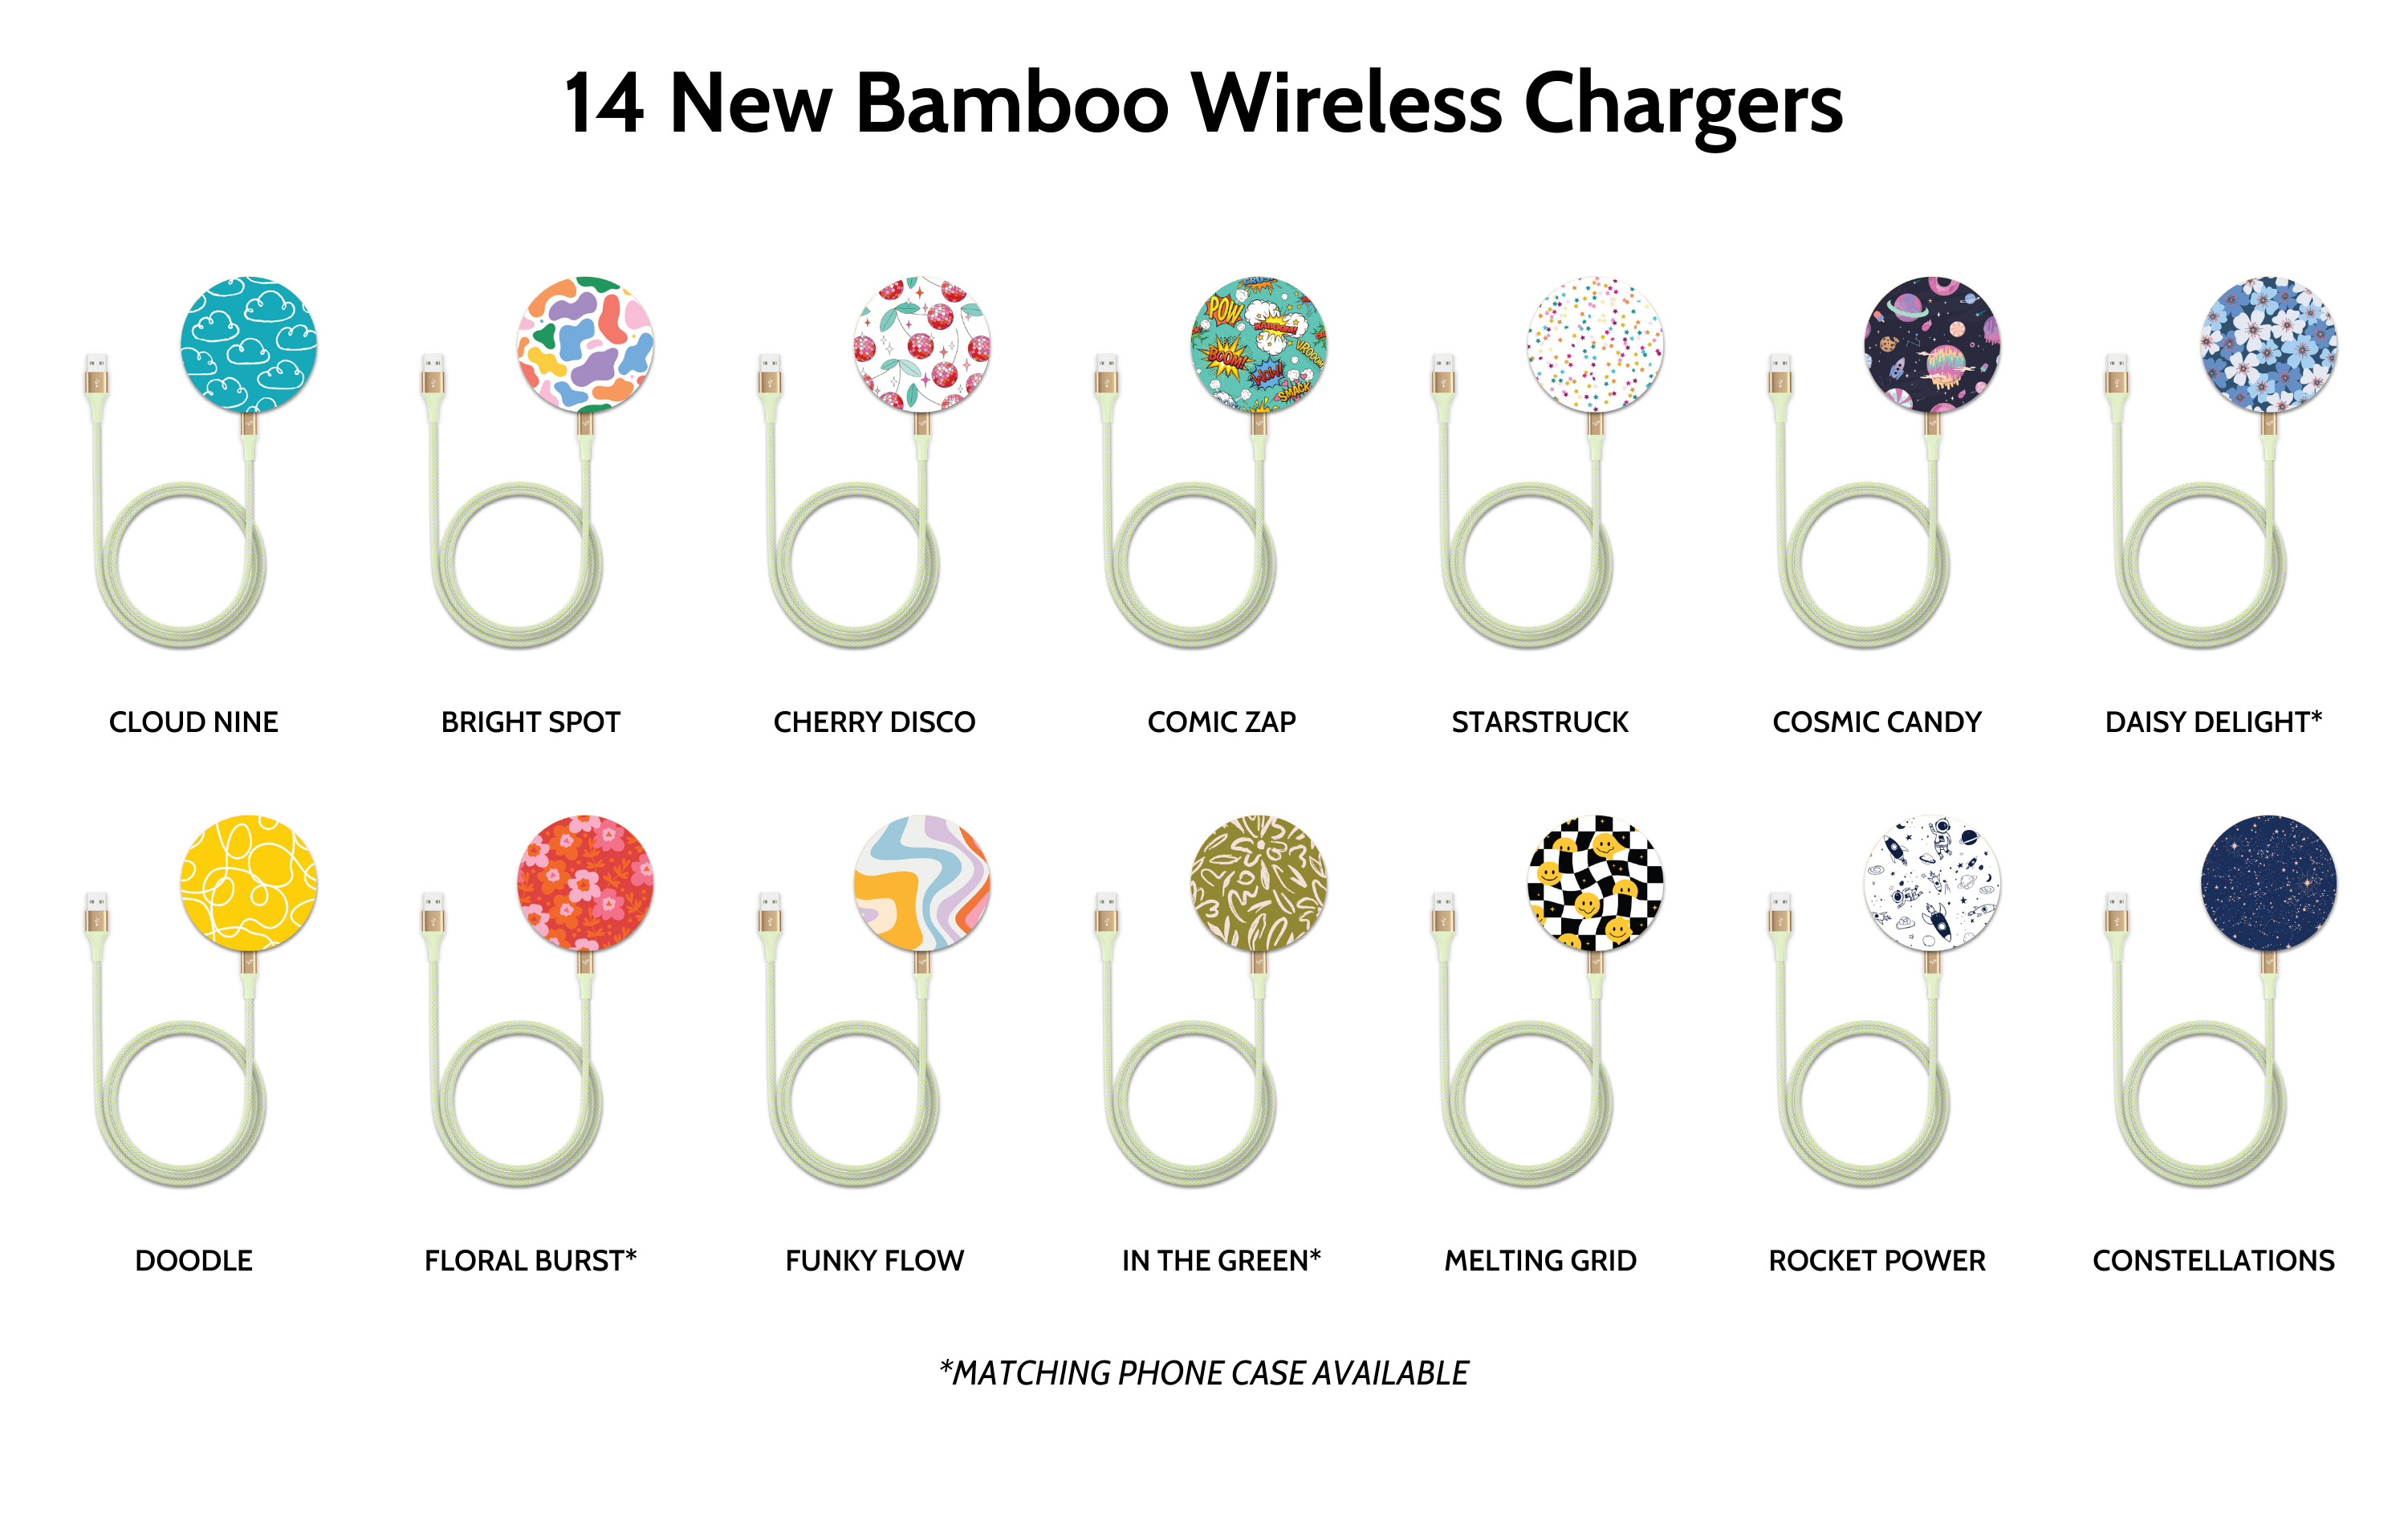 EcoBlvd's 14 New Bamboo Wireless Chargers